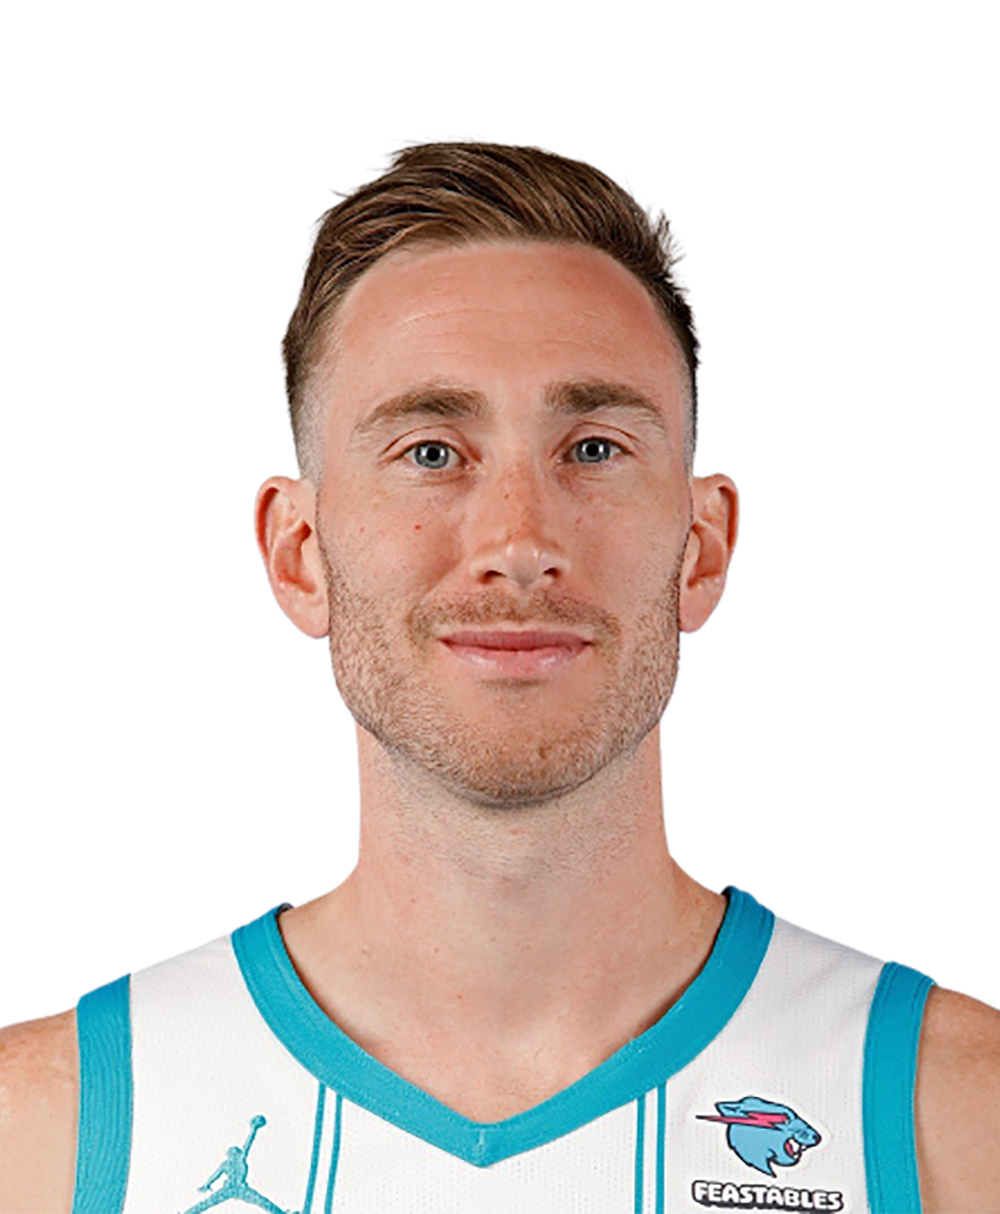 Hornets: Gordon Hayward out at least four weeks with foot injury